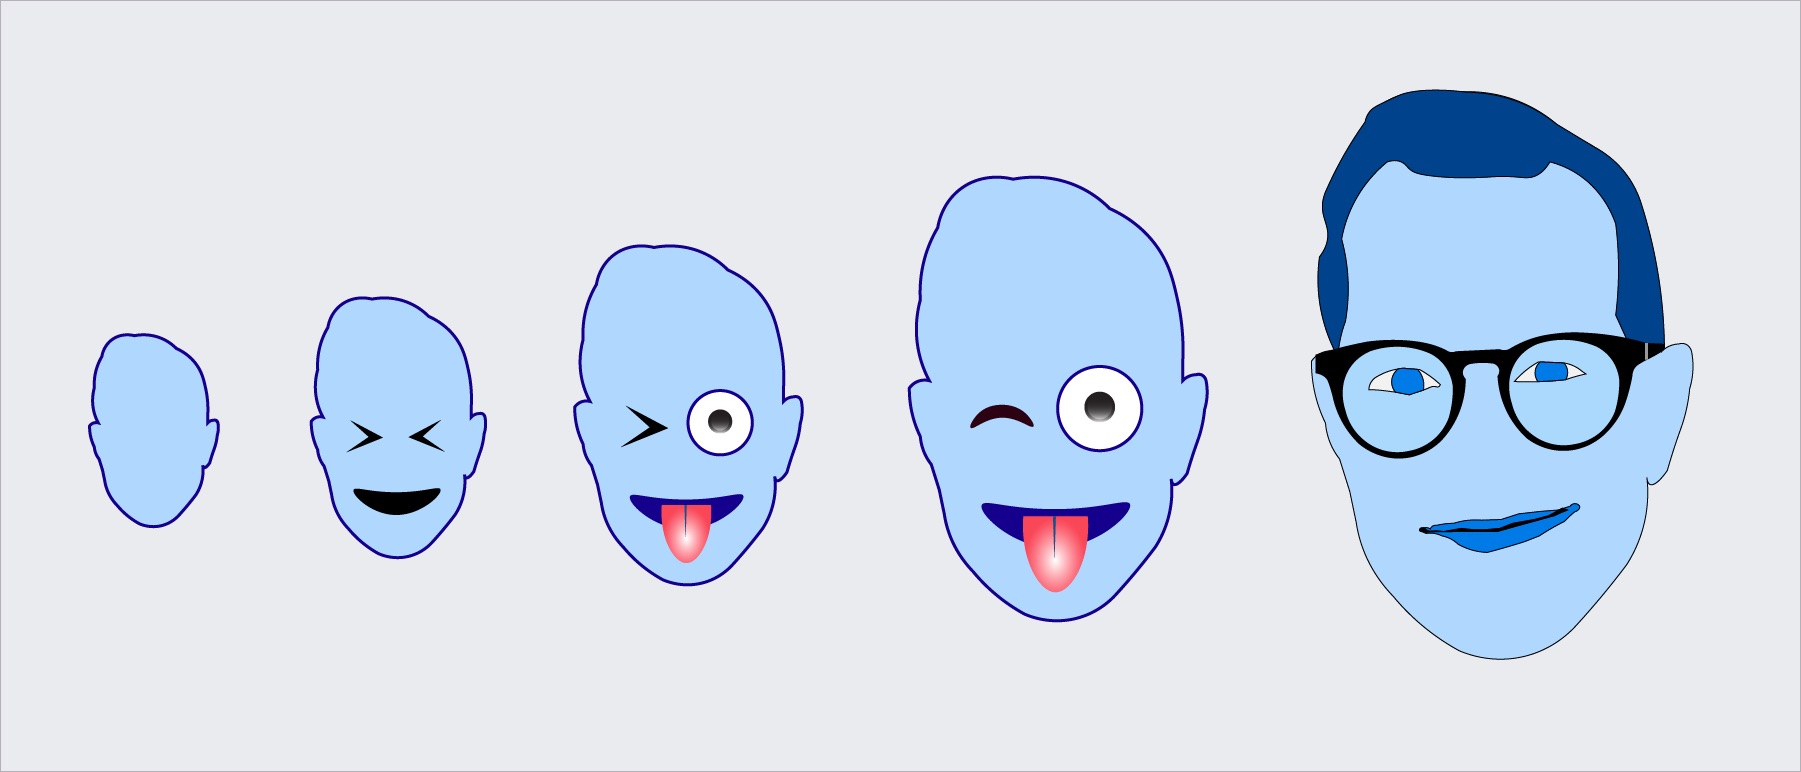 blue emoji style images of blue boy getting larger to the right